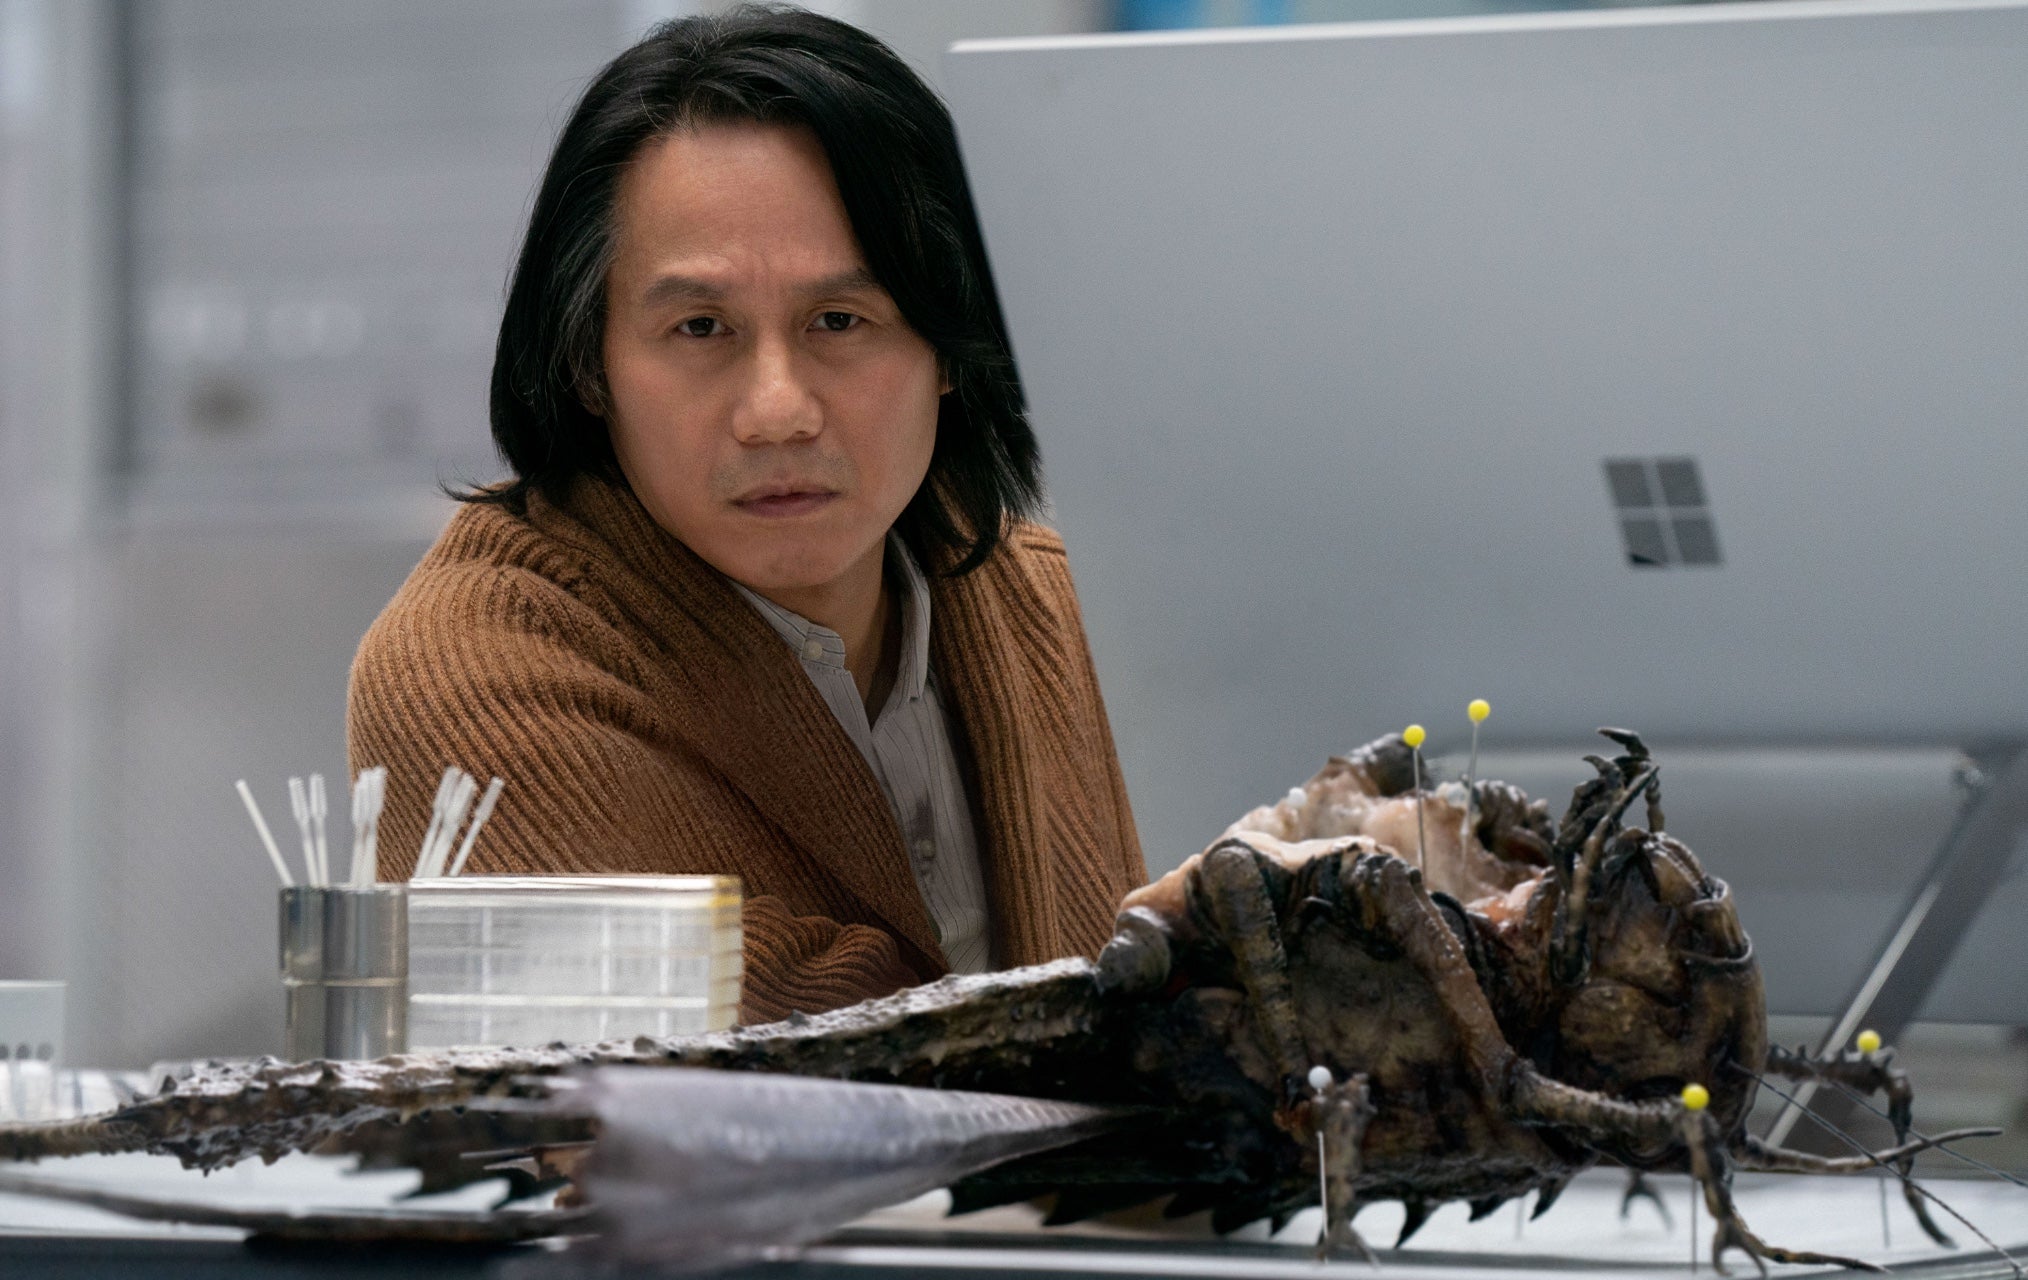 Dr. Wu and a locust. (Image: Universal)